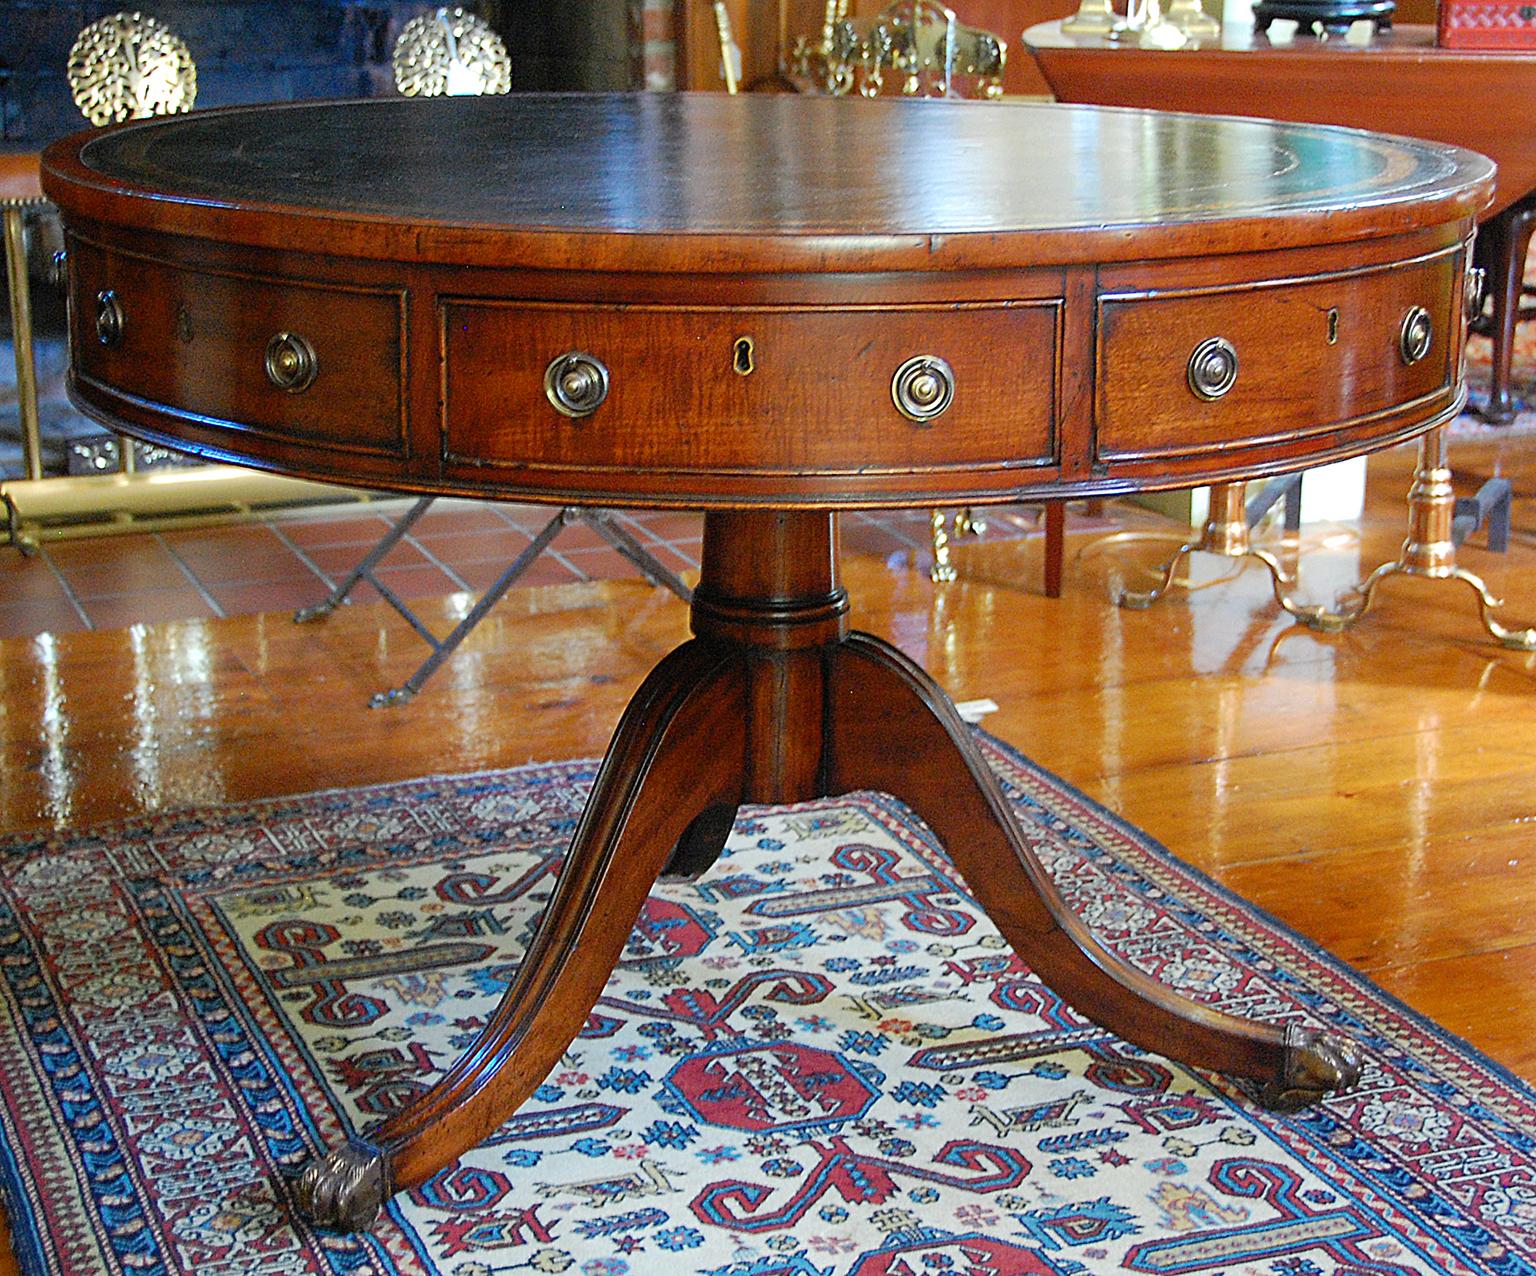 English Regency style, mid-19th century mahogany drum table, reeded down swept legs ending in cast brass paw casters, turned center pedestal, rich green hand dyed and gold tooled full leather inlaid top. Three working drawers, three sham drawers. At